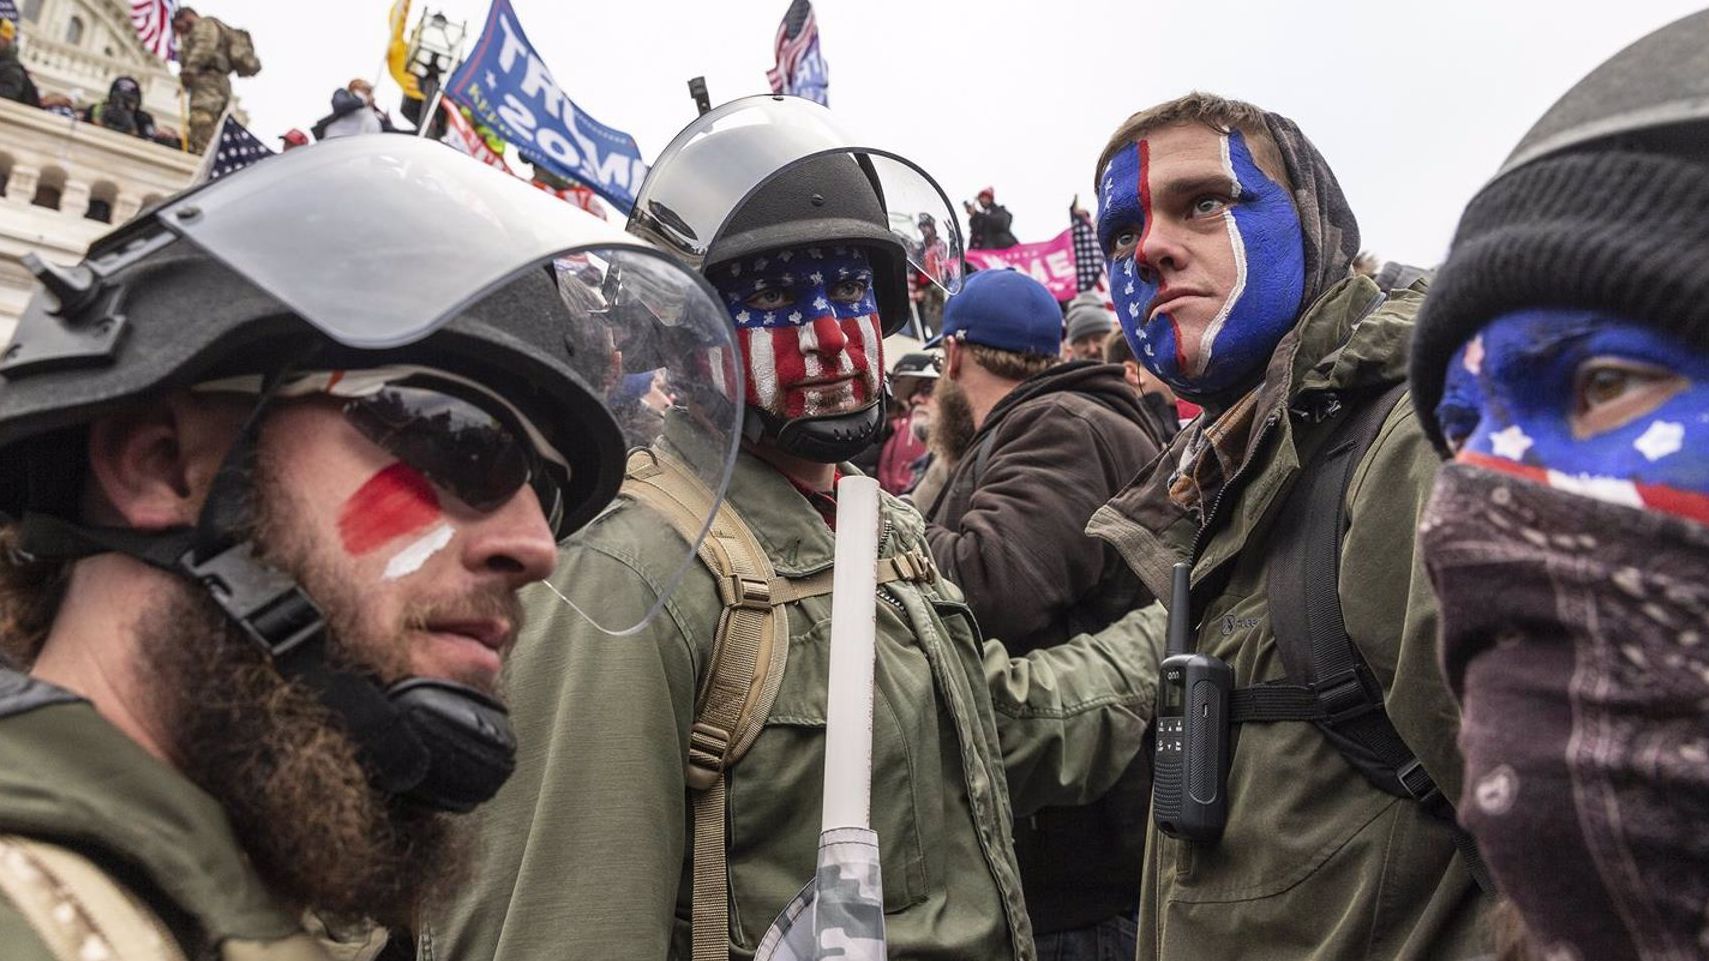 Five members of the far-right group America First arrested for attacking the Capitol